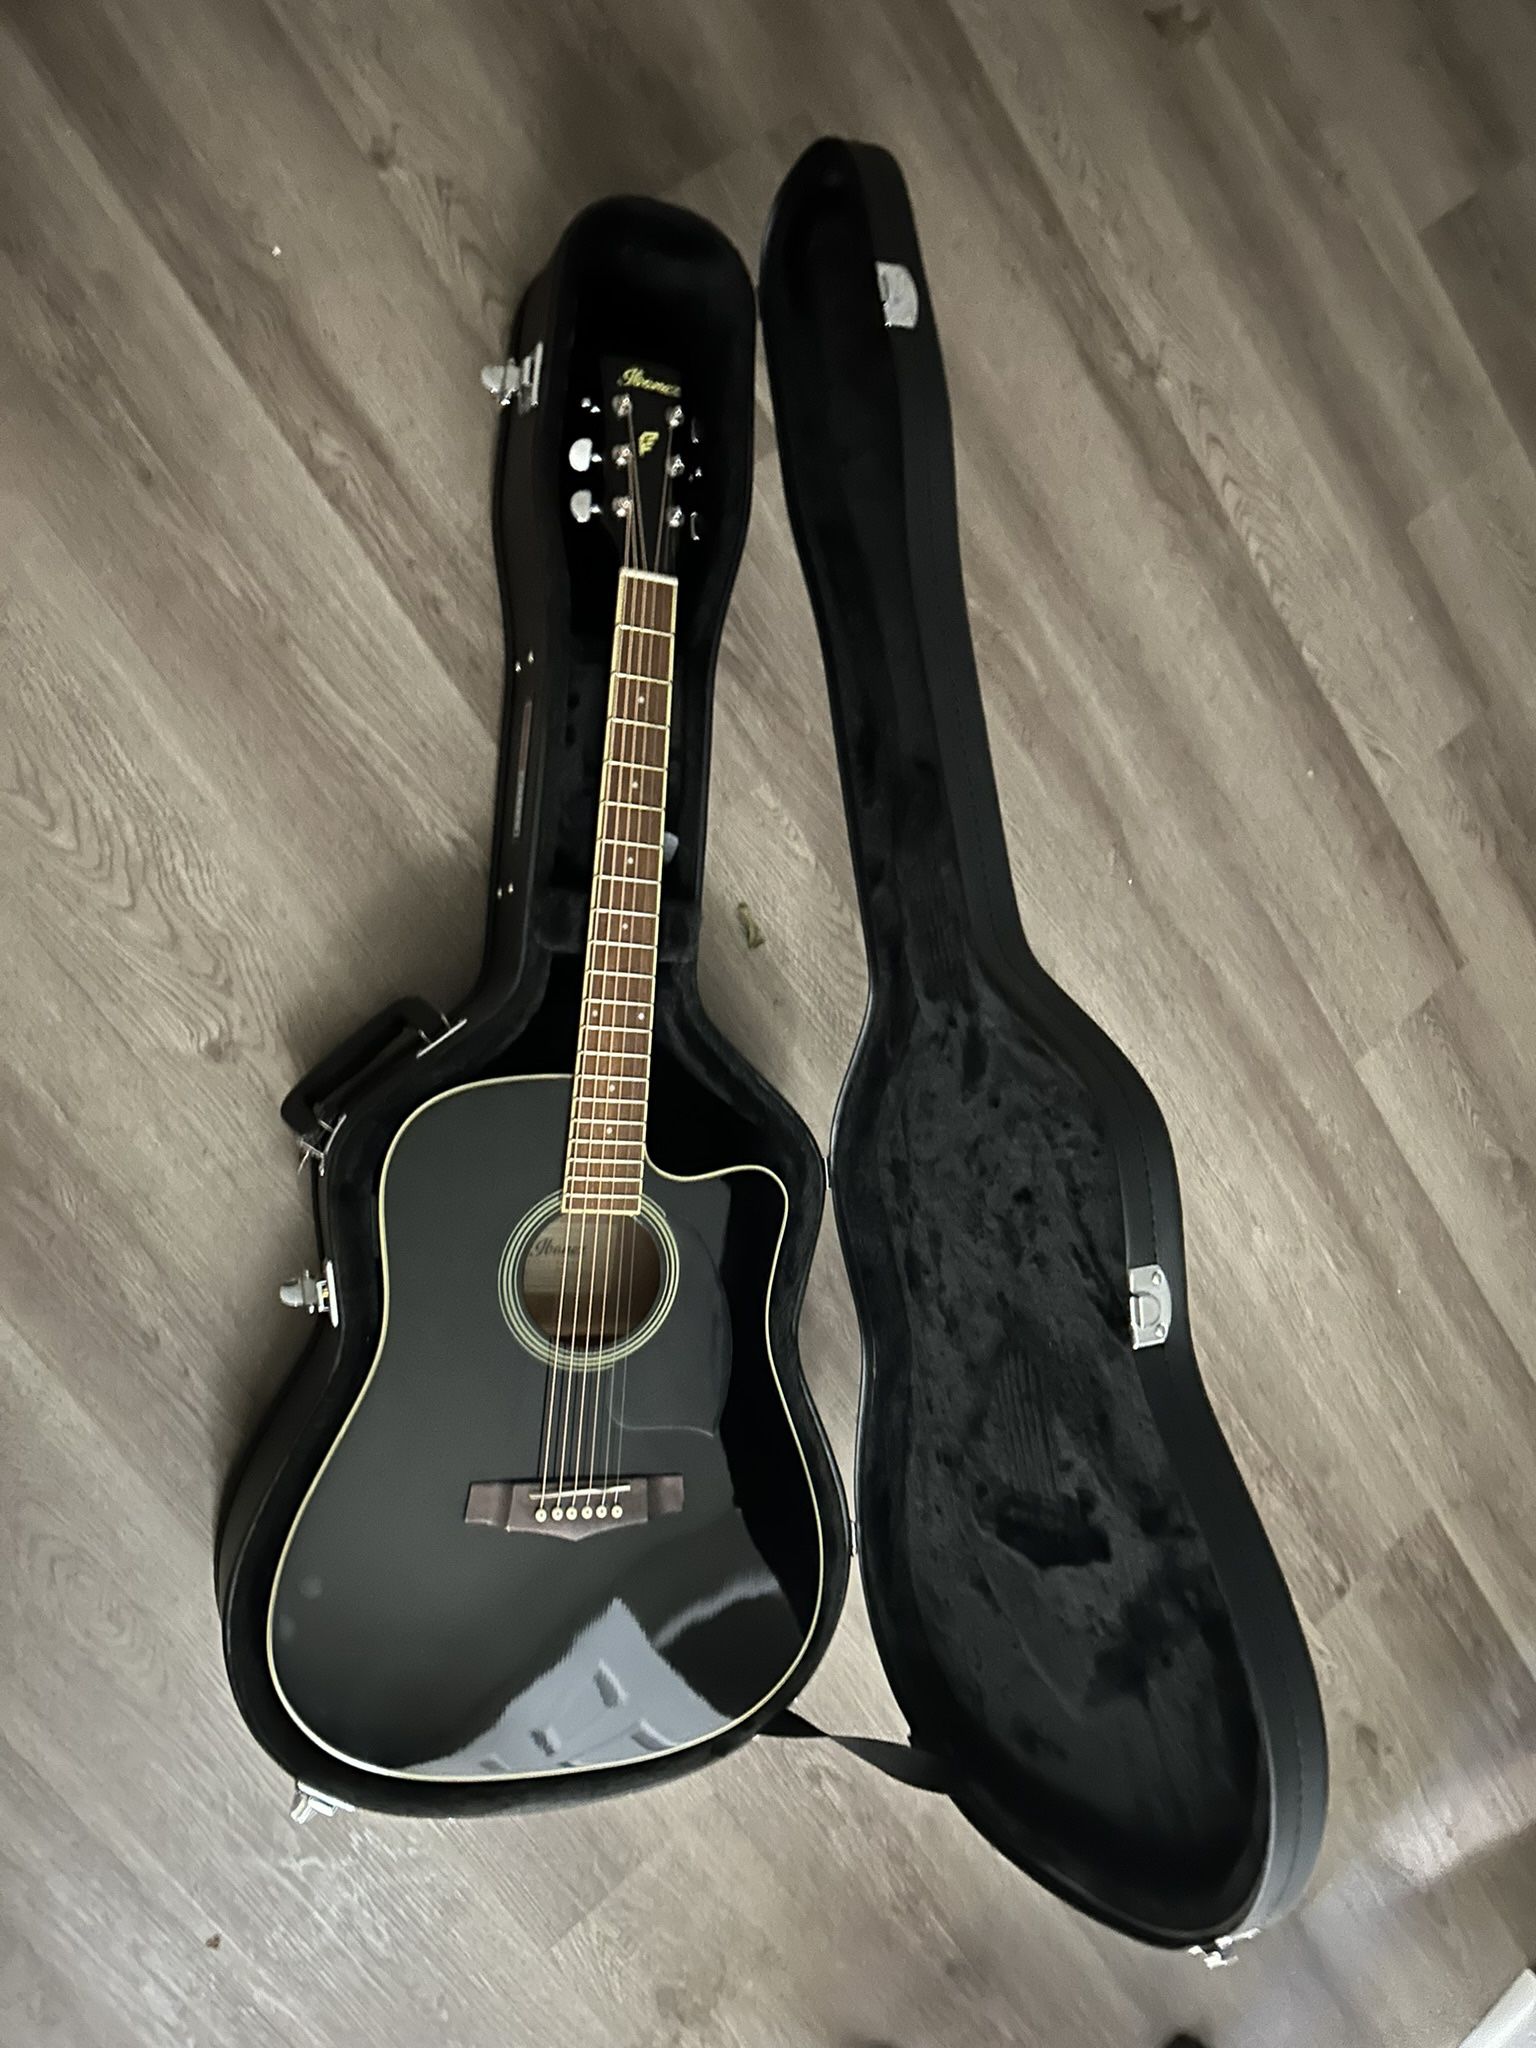 Ibanez All Black Electric Acoustic Guitar 